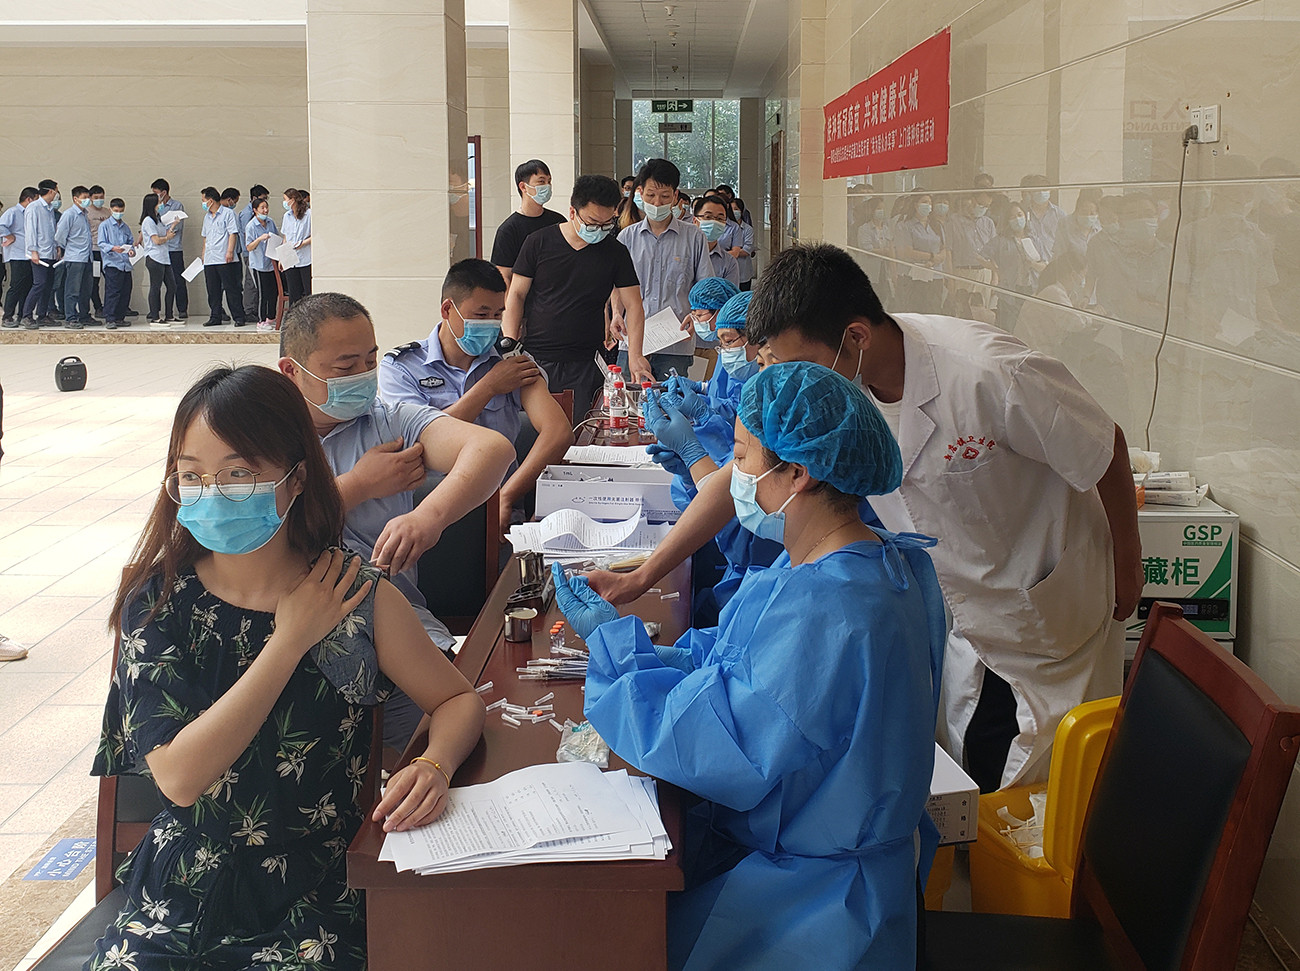 Inoculate the new crown vaccine to build a healthy Great Wall-Luoyang Jinlu Party General Branch and Xindian Town Health Center launch "I do practical things for the masses" door-to-door vaccination campaign